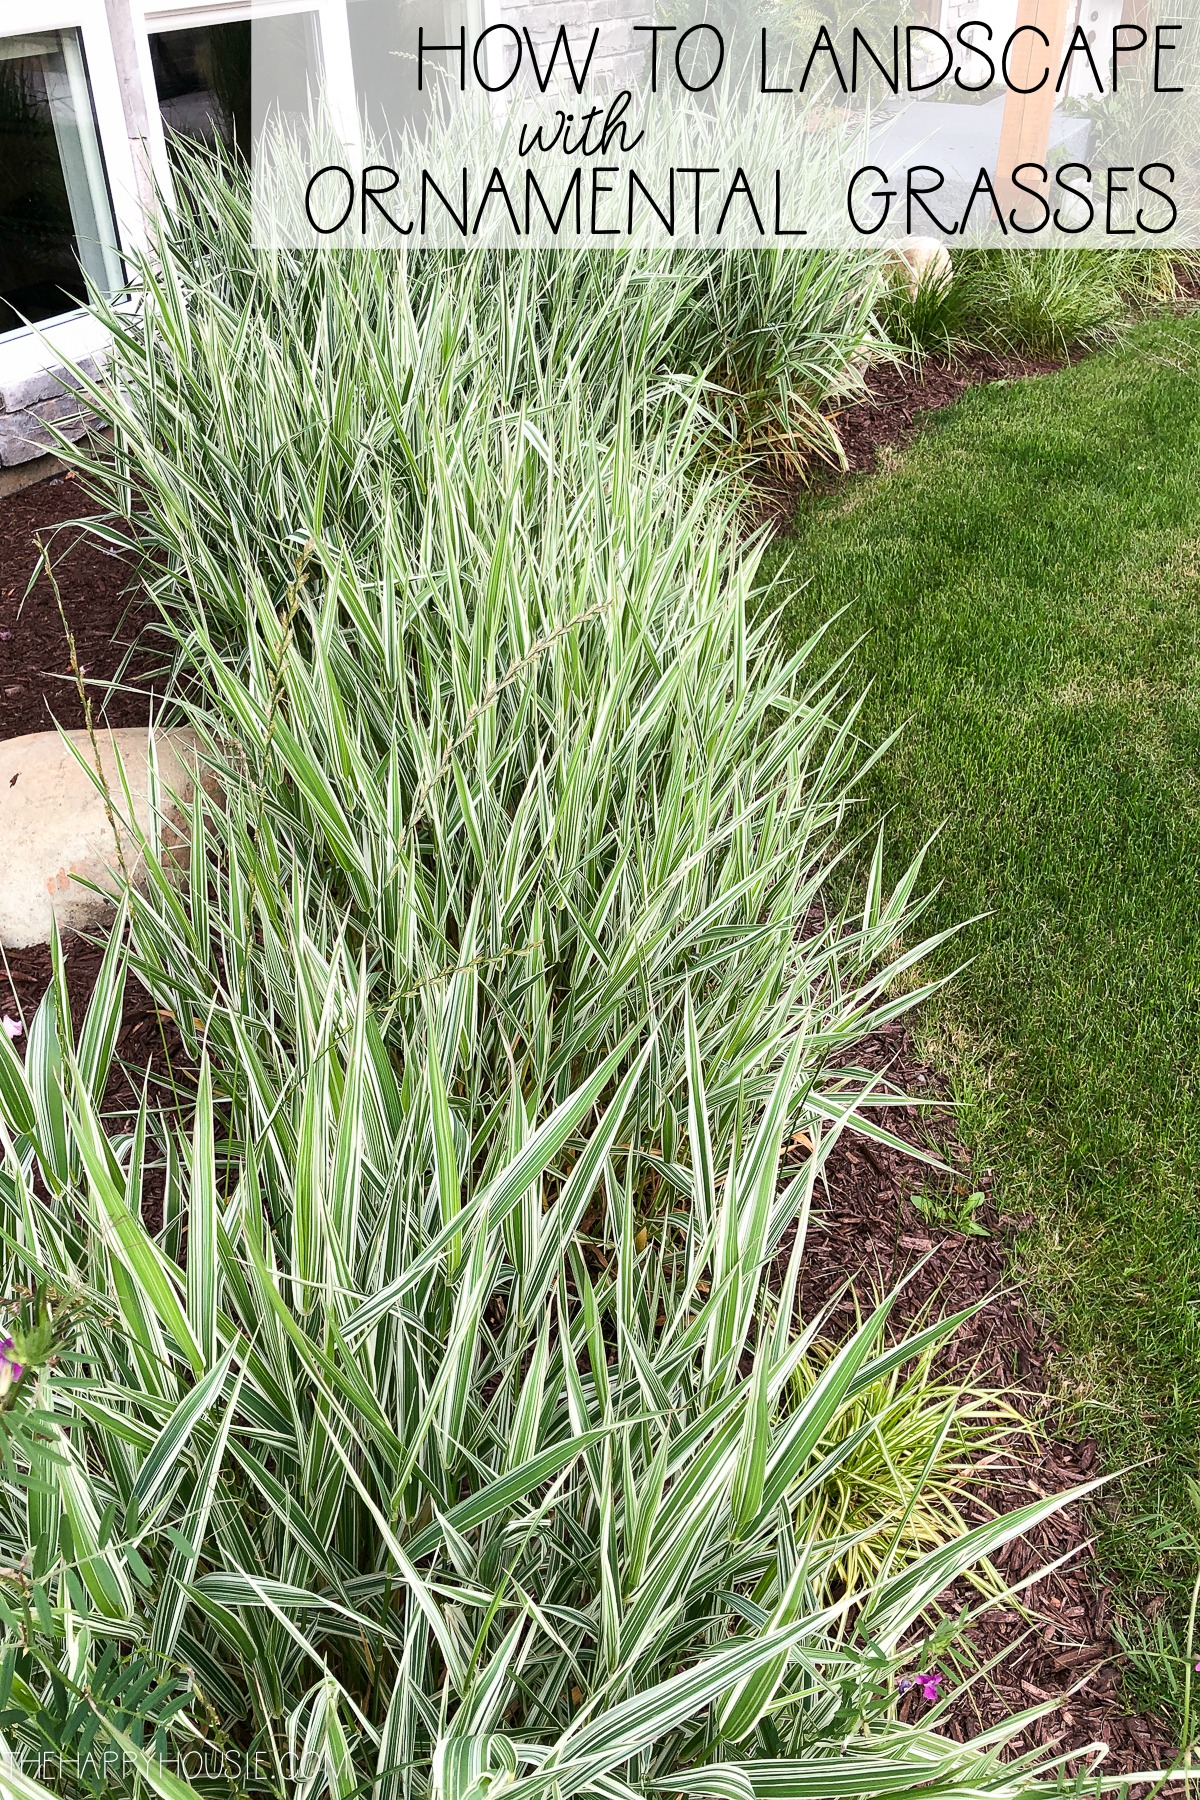 Ornamental Grasses In Your Landscaping, Landscaping With Ornamental Grasses Plans